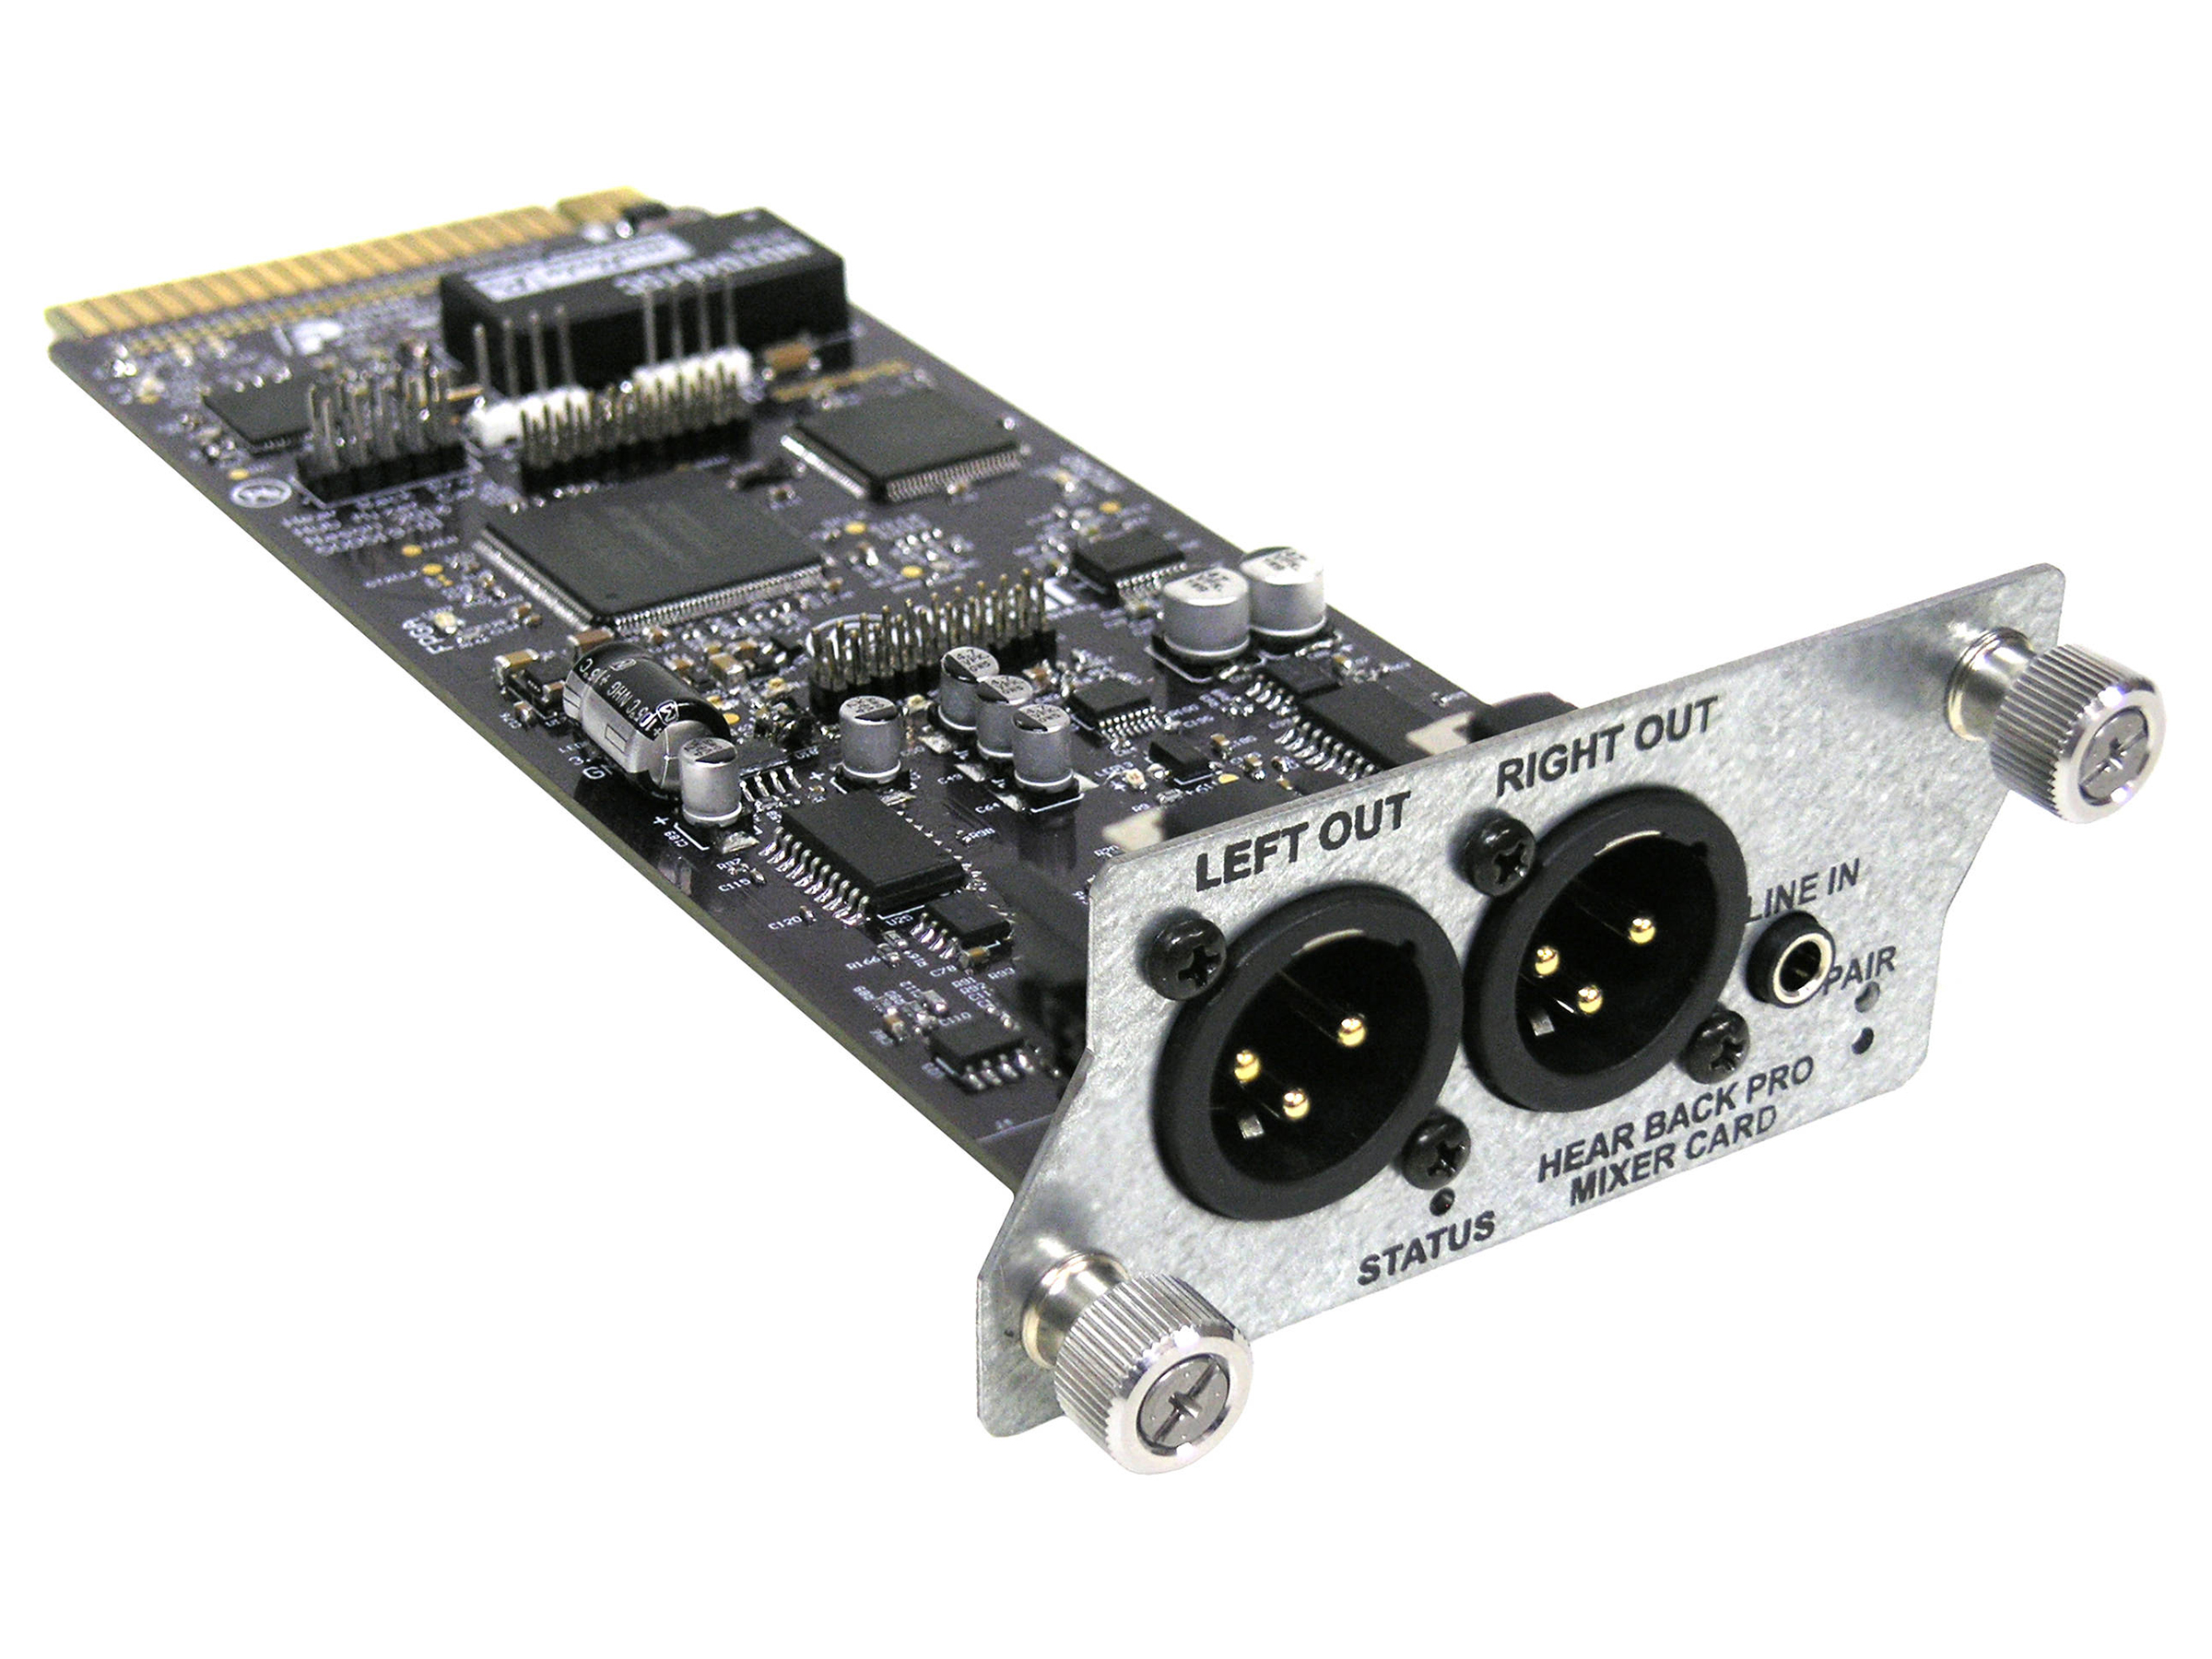 PROHVMC Virtual Mixer I/O card for the HB PRO Hub by Hear Technologies